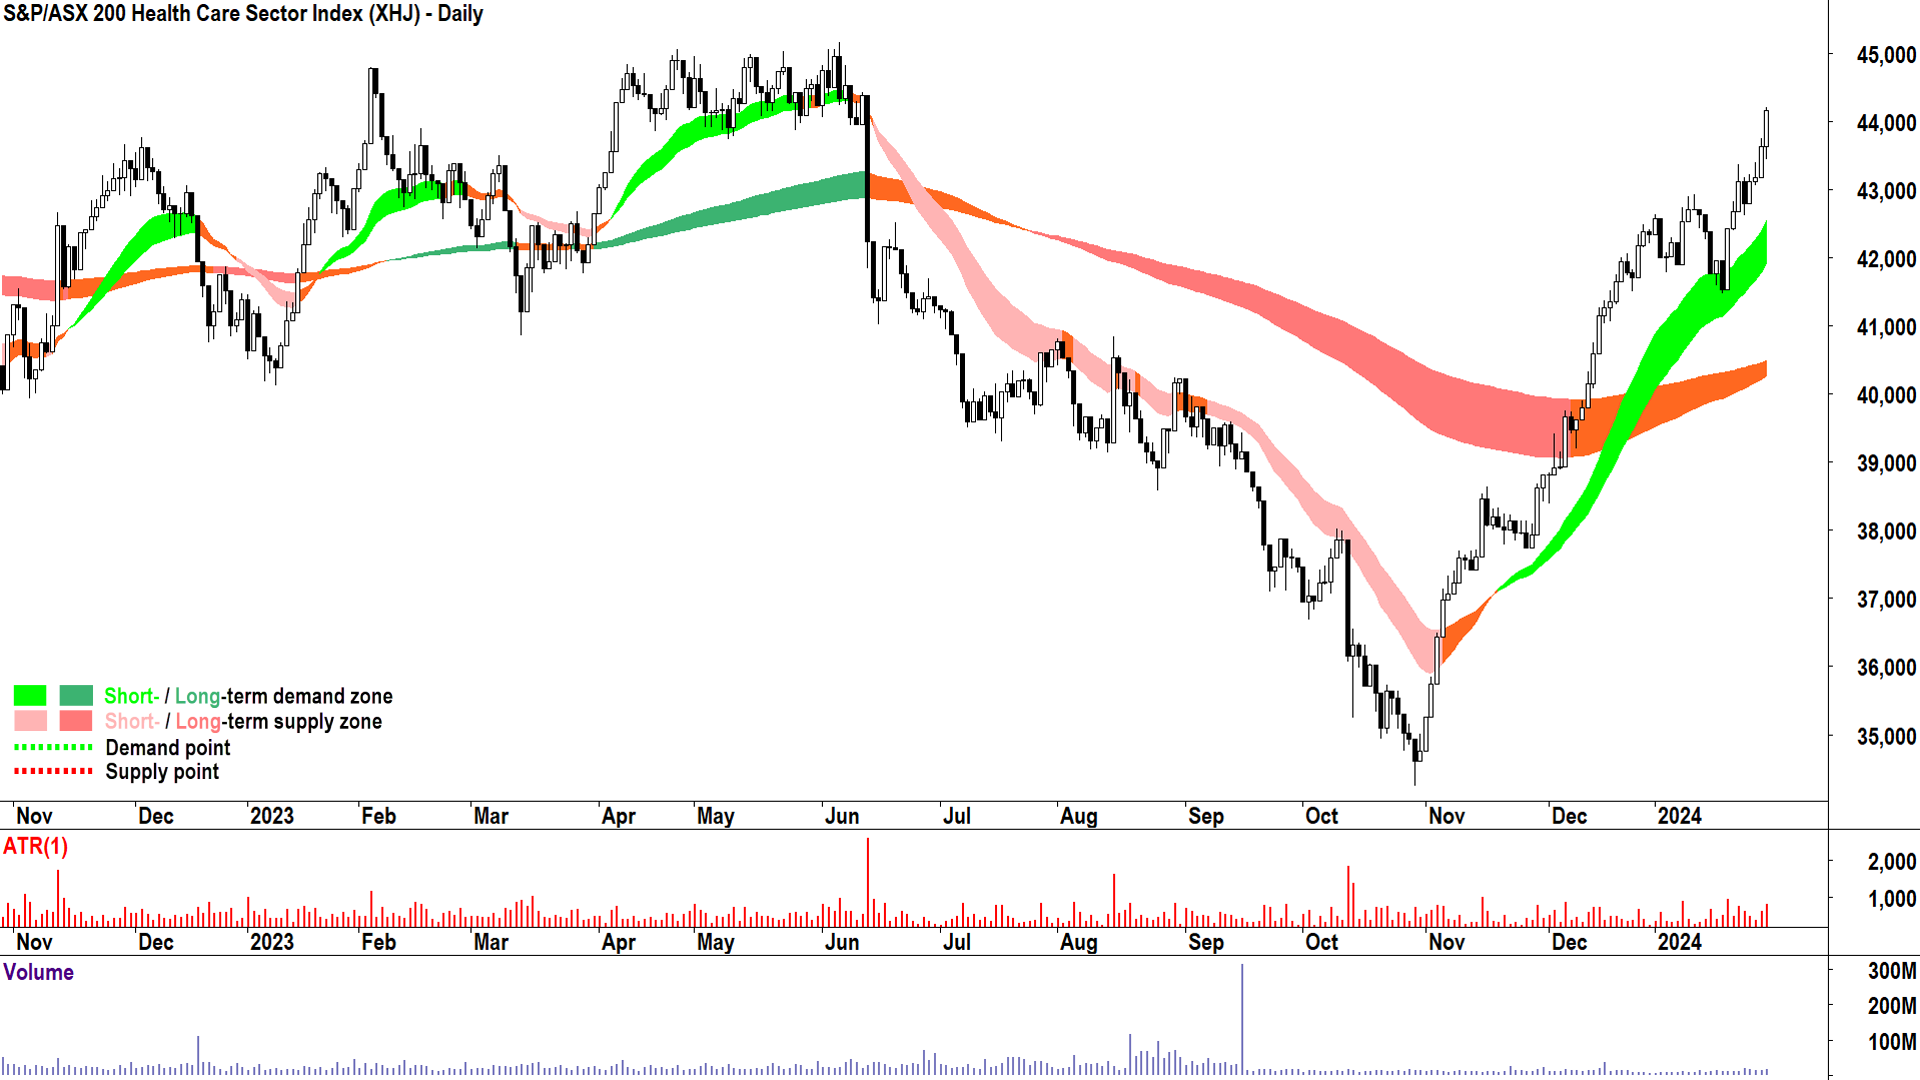 S&P ASX 200 Healthcare Sector (XHJ) chart